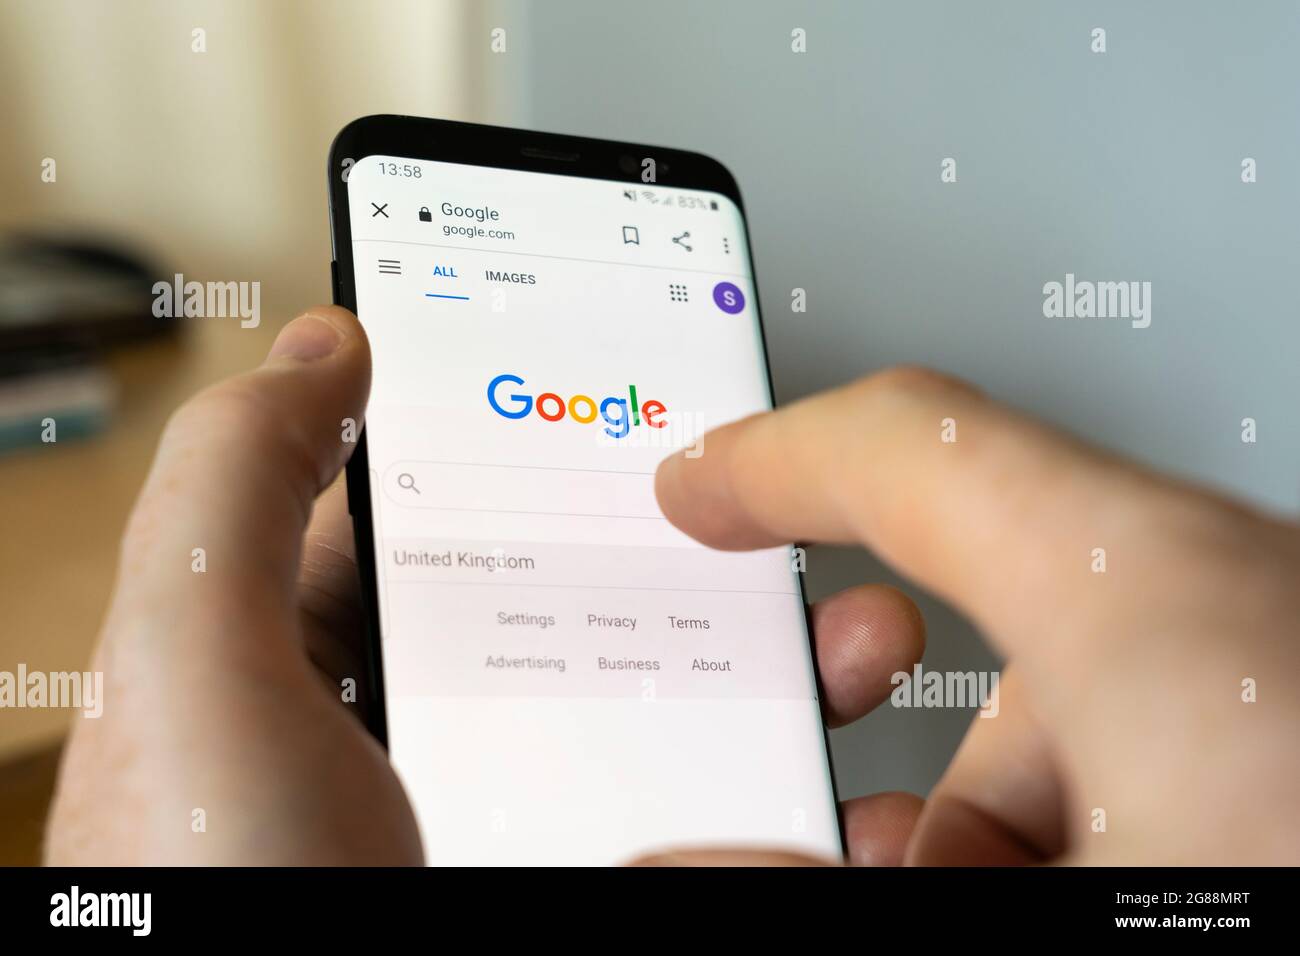 A man's hand holding an Android smartphone at home and selecting the Google Search bar on the google.com search engine homepage Stock Photo